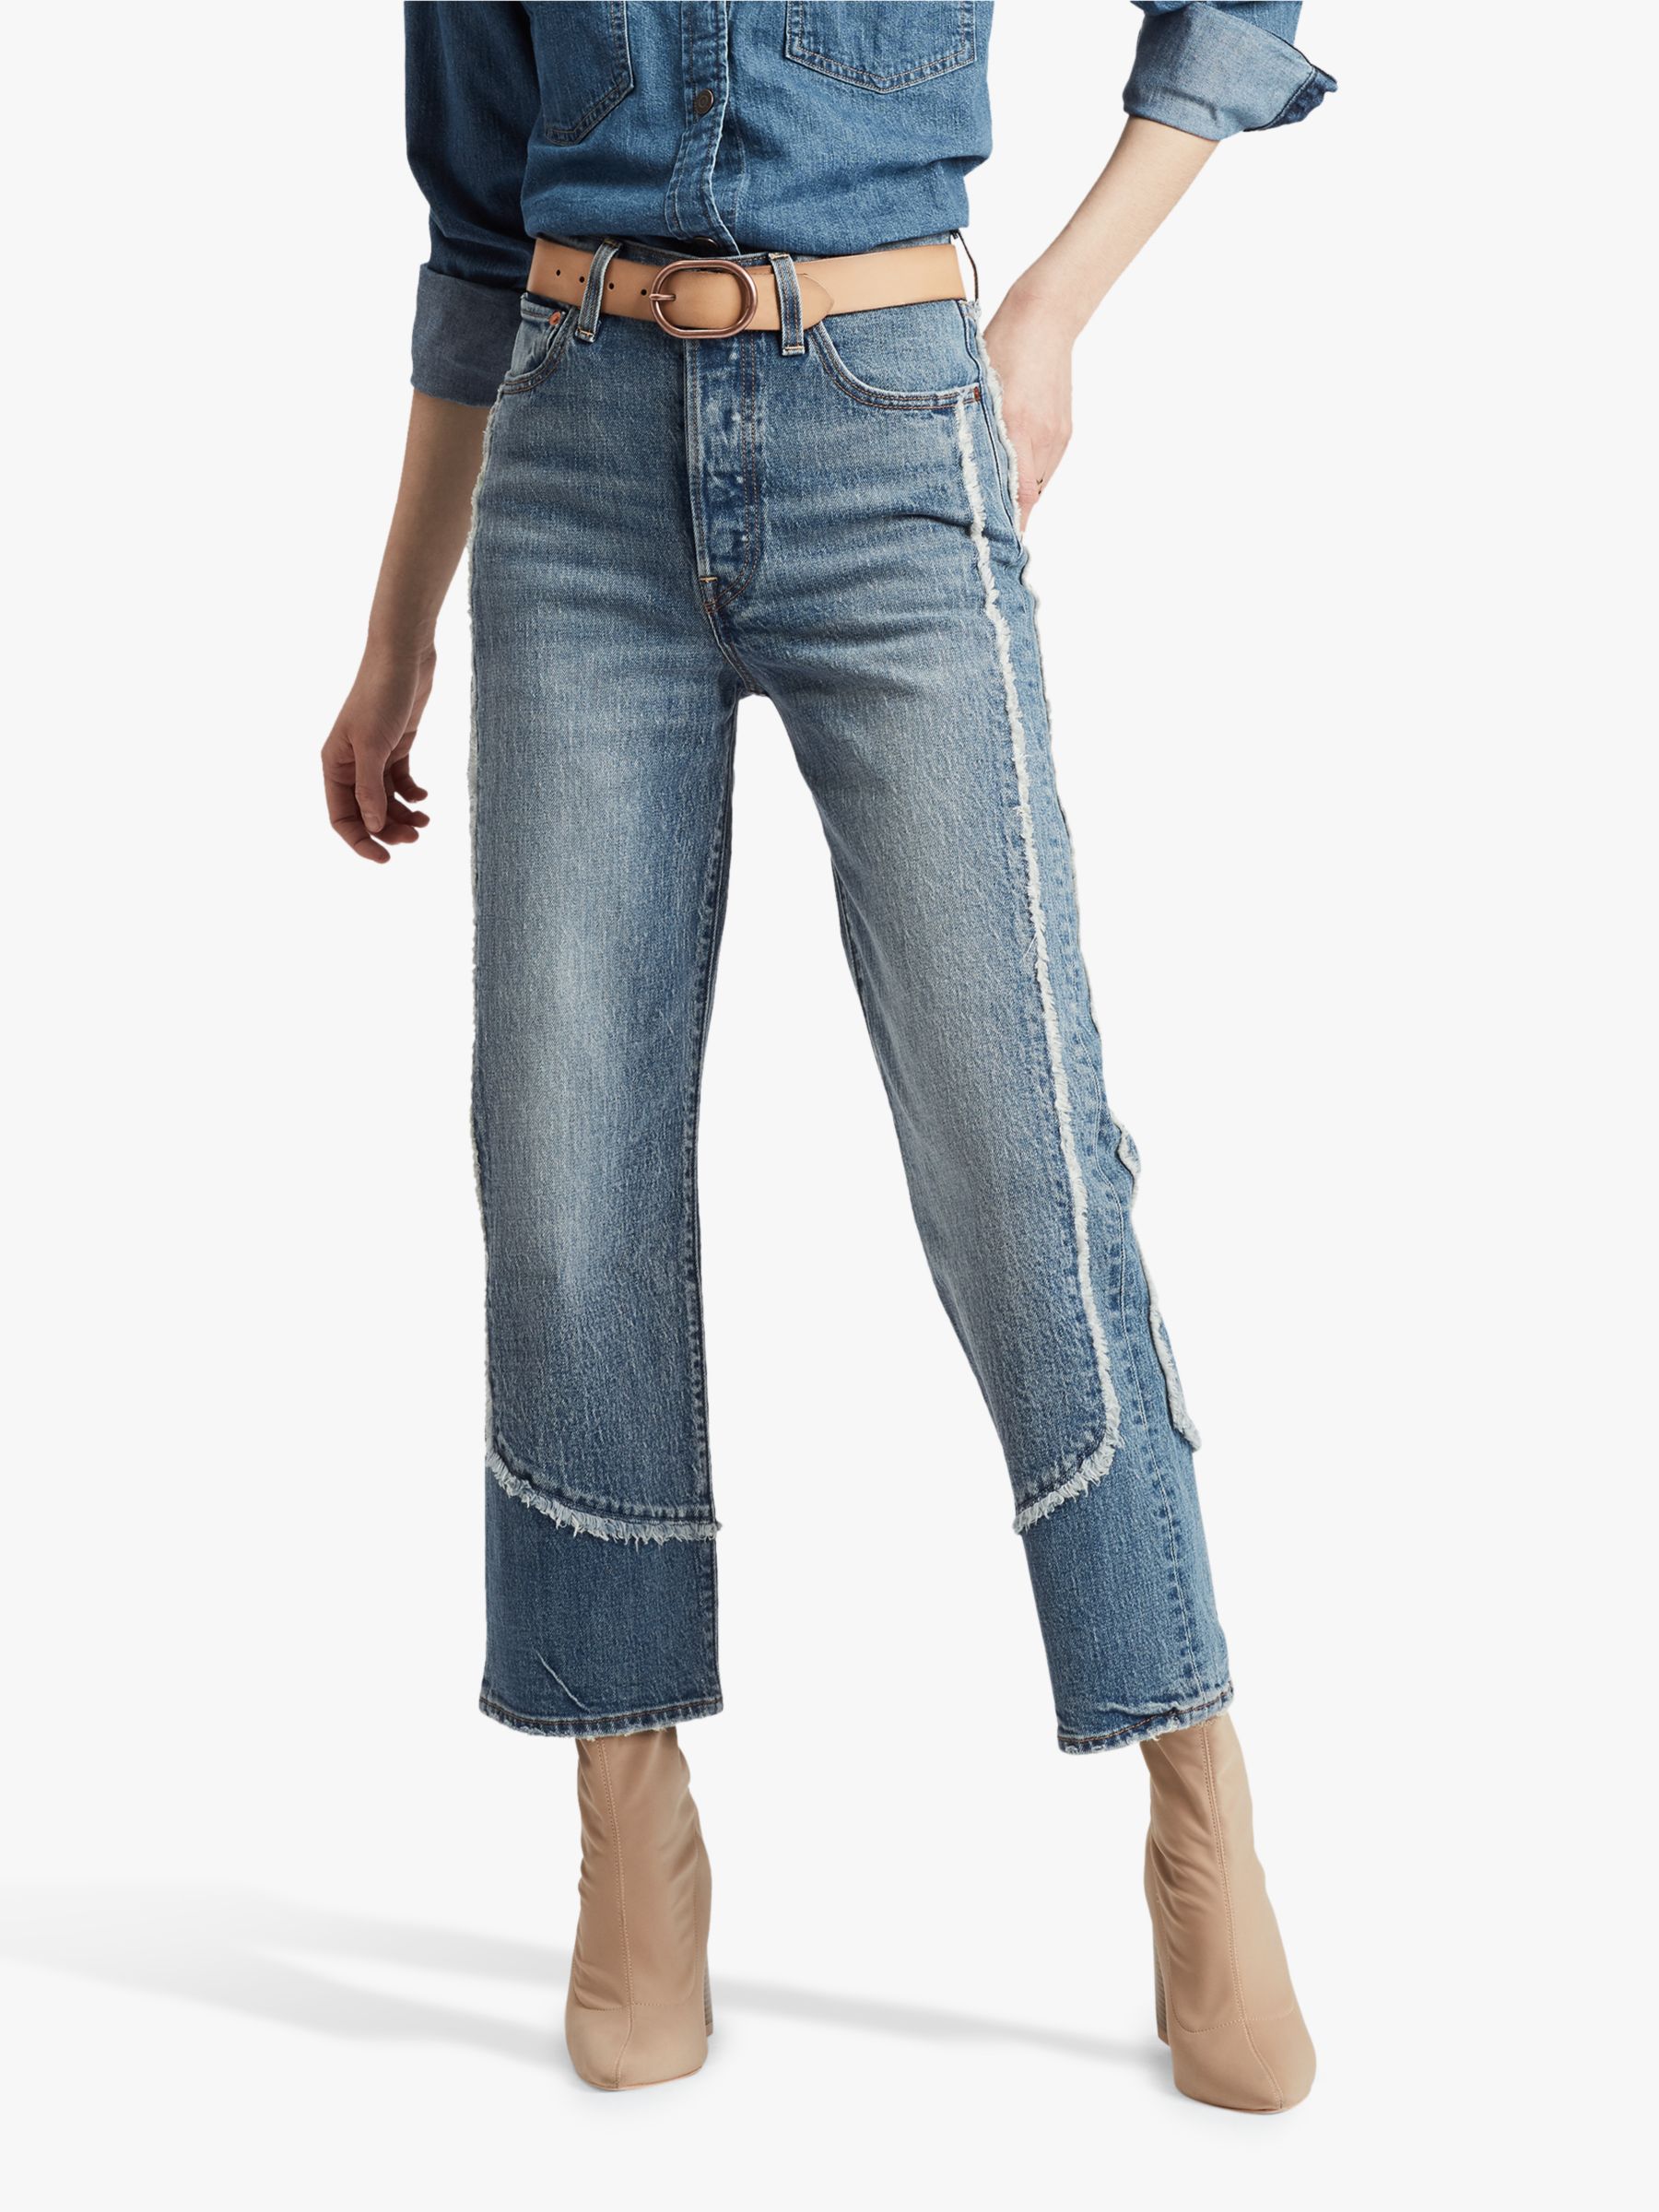 Levi's Ribcage Straight Ankle Jeans, On 